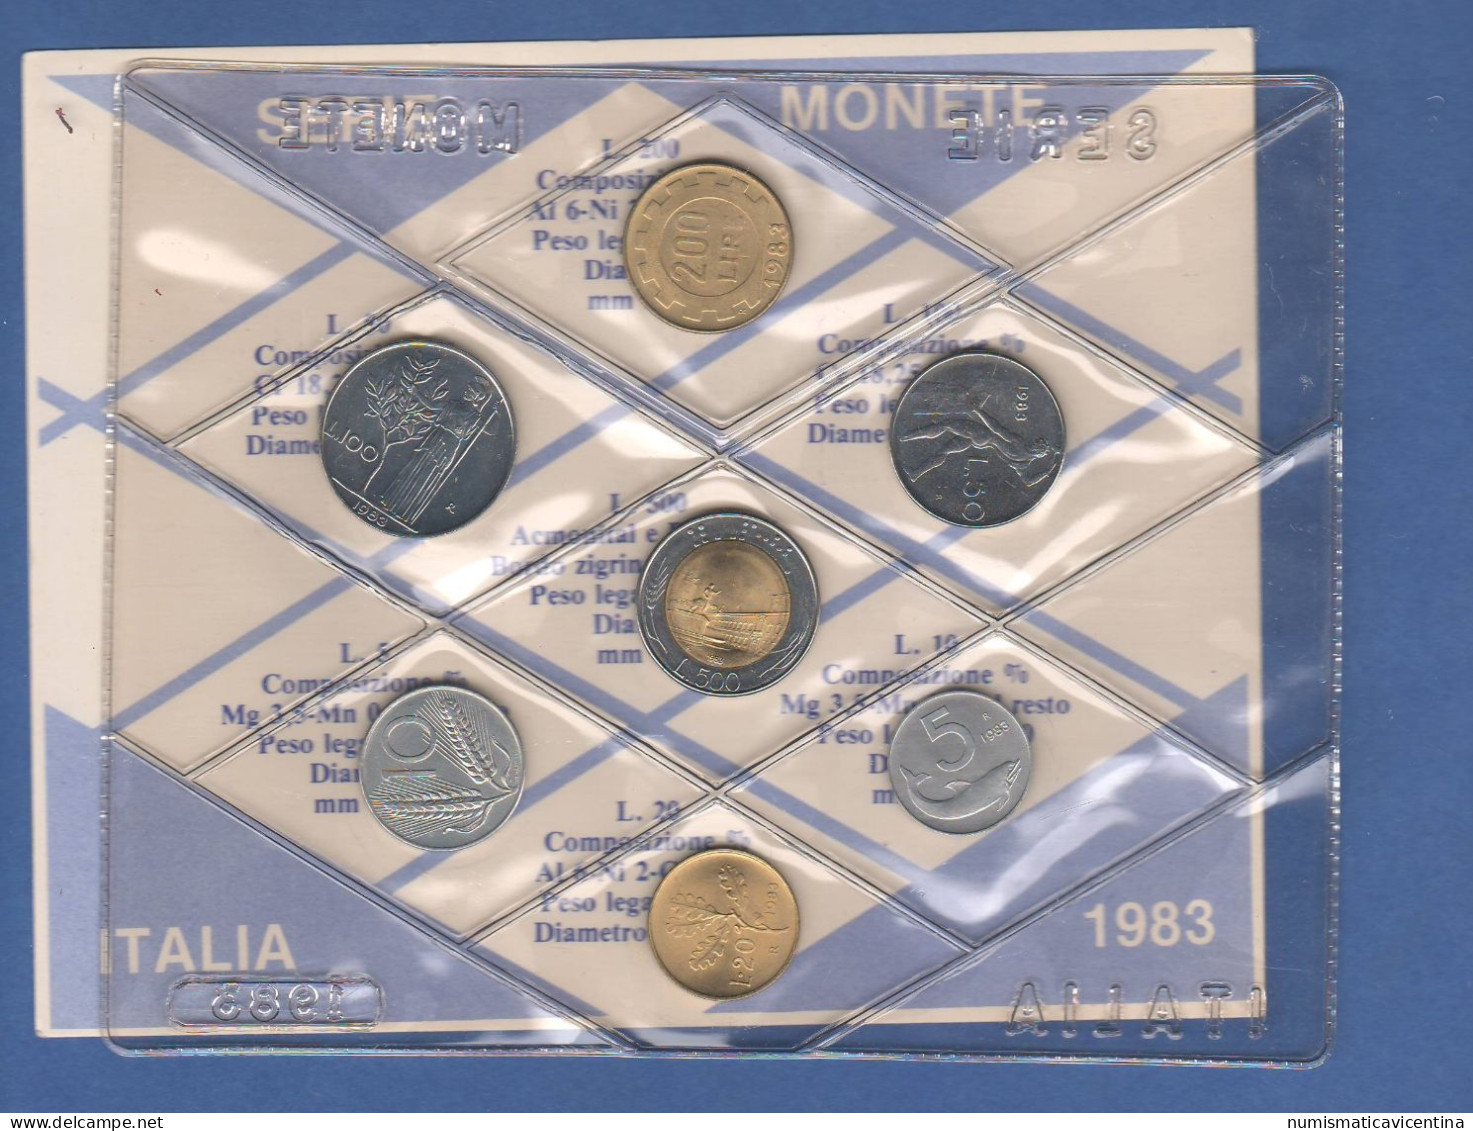 ITALIA 1983 Serie 7 Monete 5 10 20 50 100 200 500 Lire FDC UNC Italy Coin Set Private Issues Emissioni Private - Nieuwe Sets & Proefsets